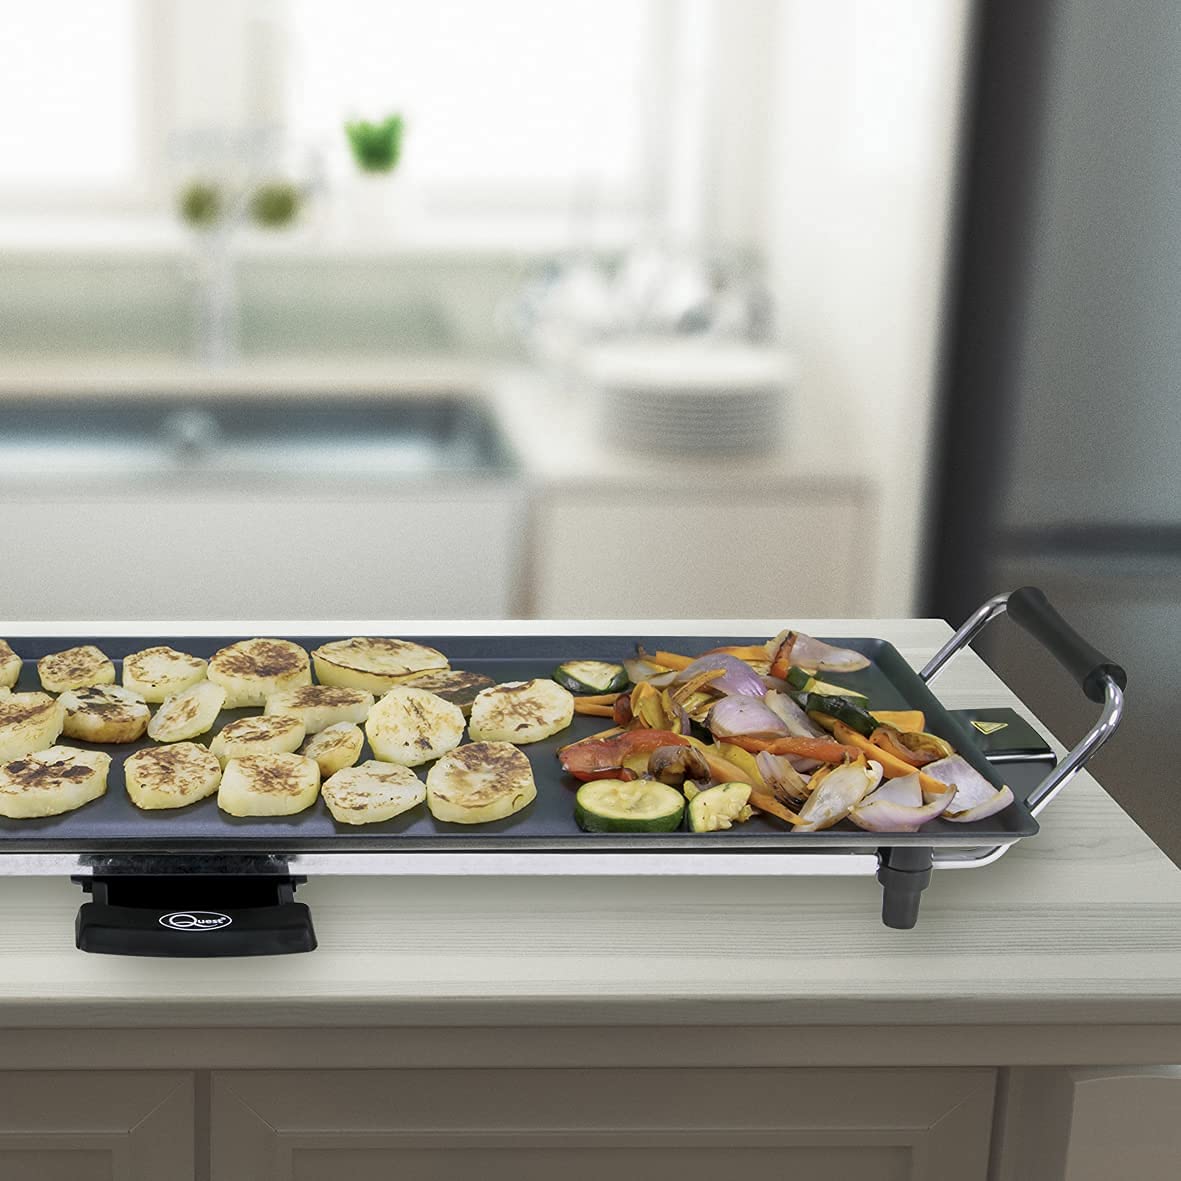 Extra Large Quest Electric Non-Stick Table Top Grill - Teppanyaki  (35790)